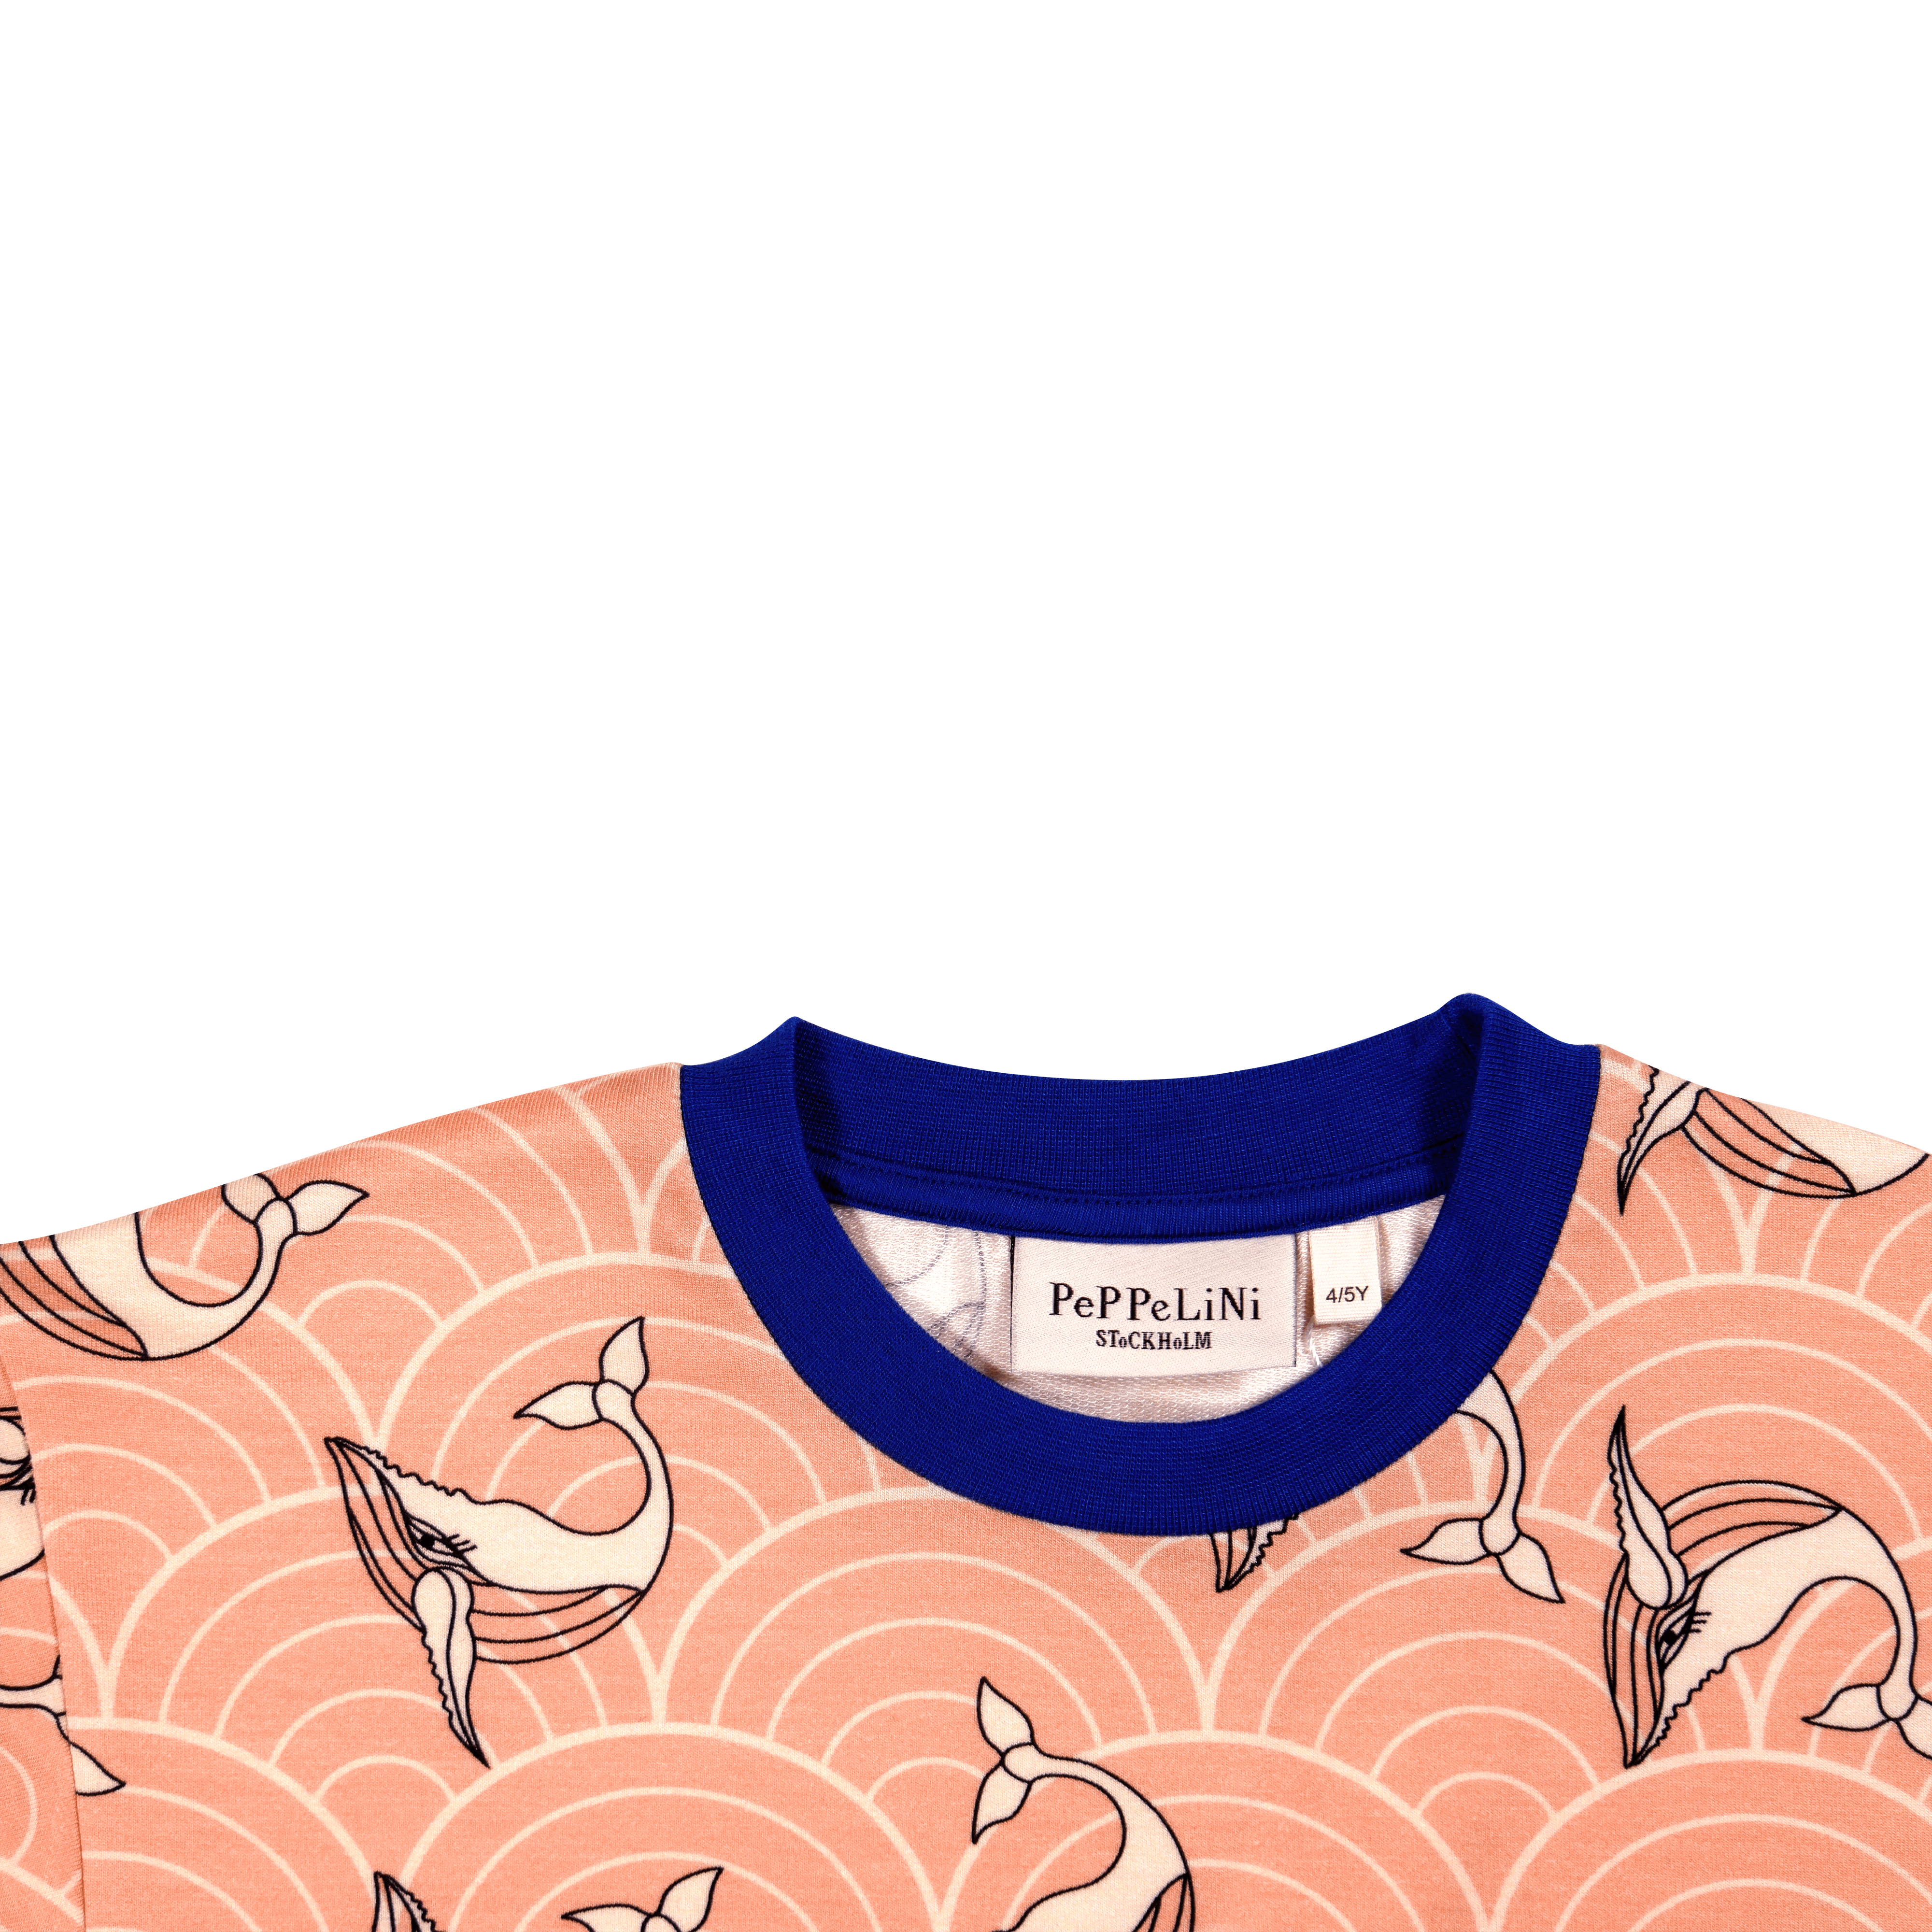  Peppelini sweater pink whale pattern Japanese sea patterns the collar